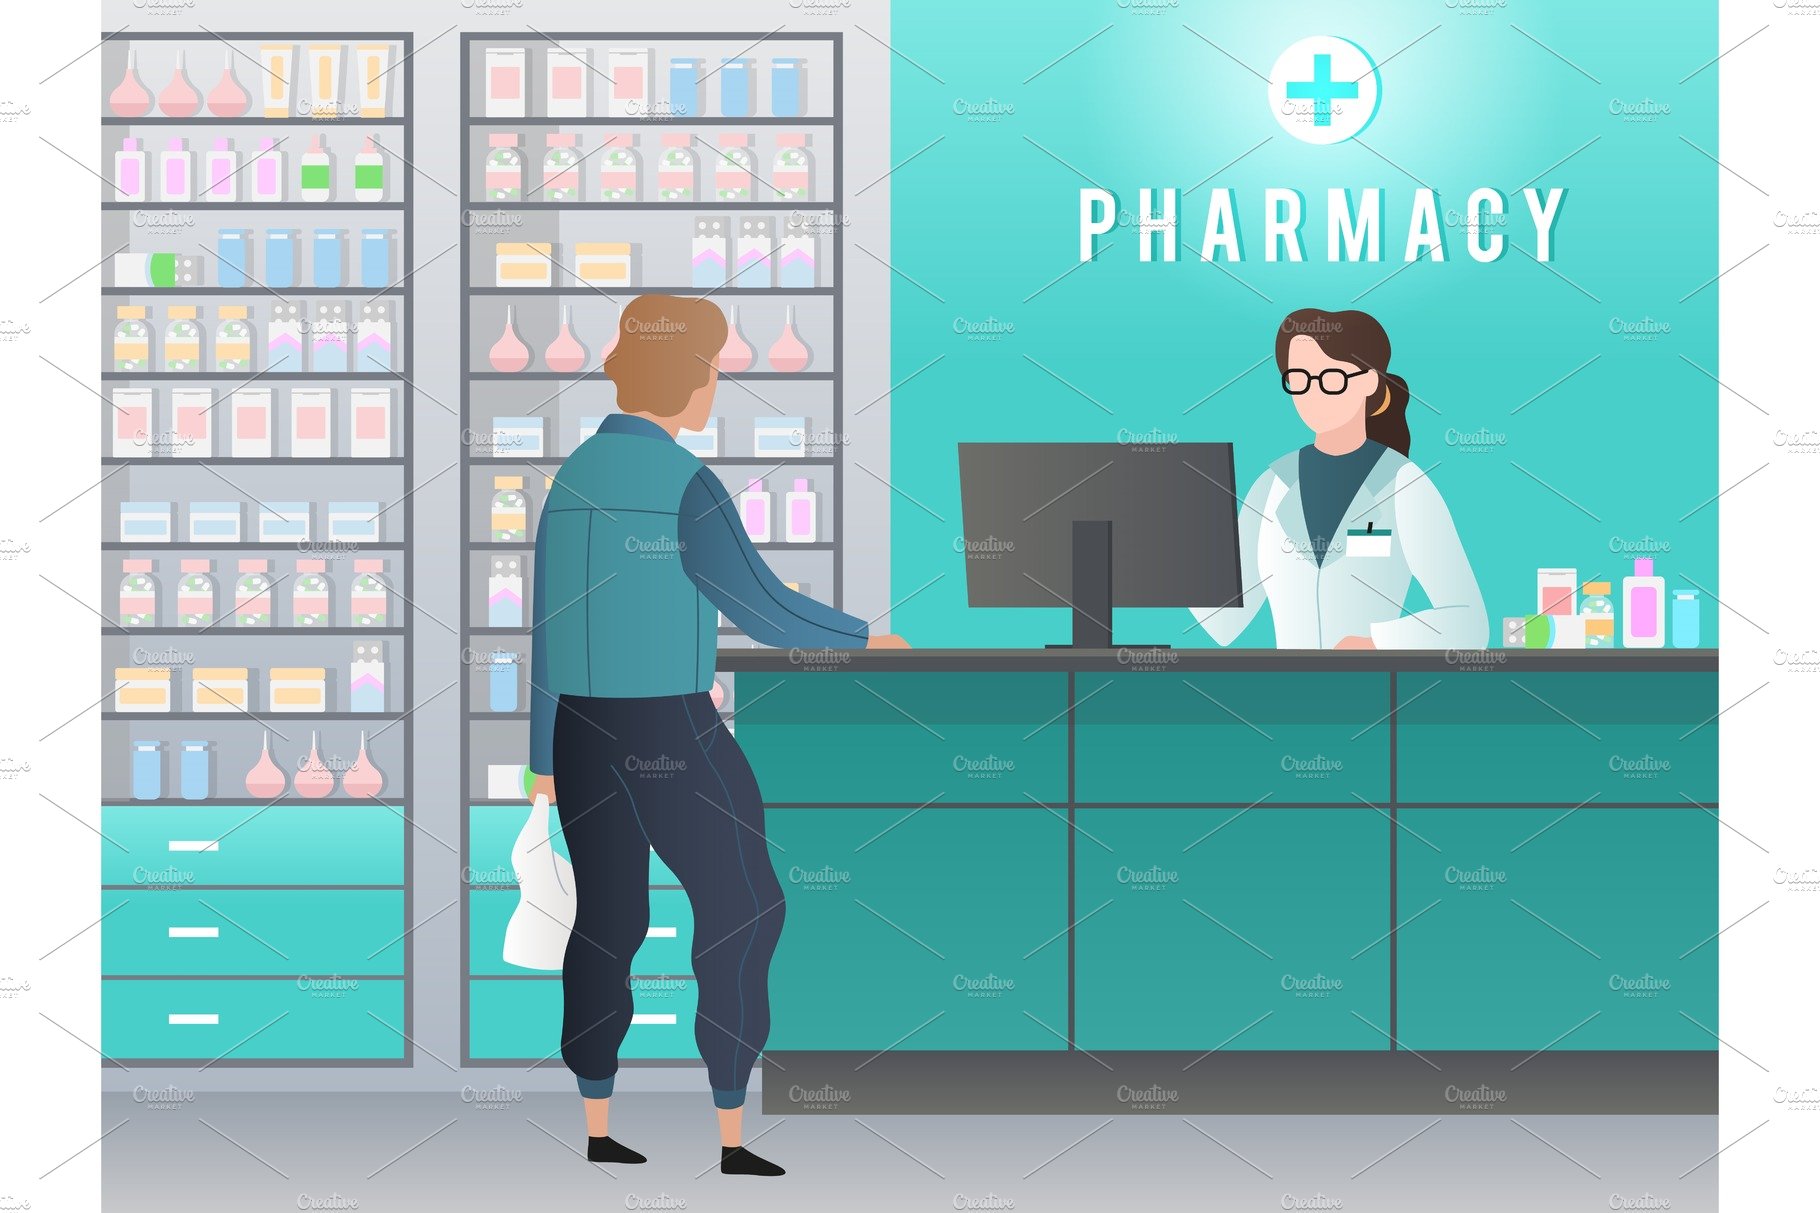 Drugstore. Pharmacy with pharmacist cover image.